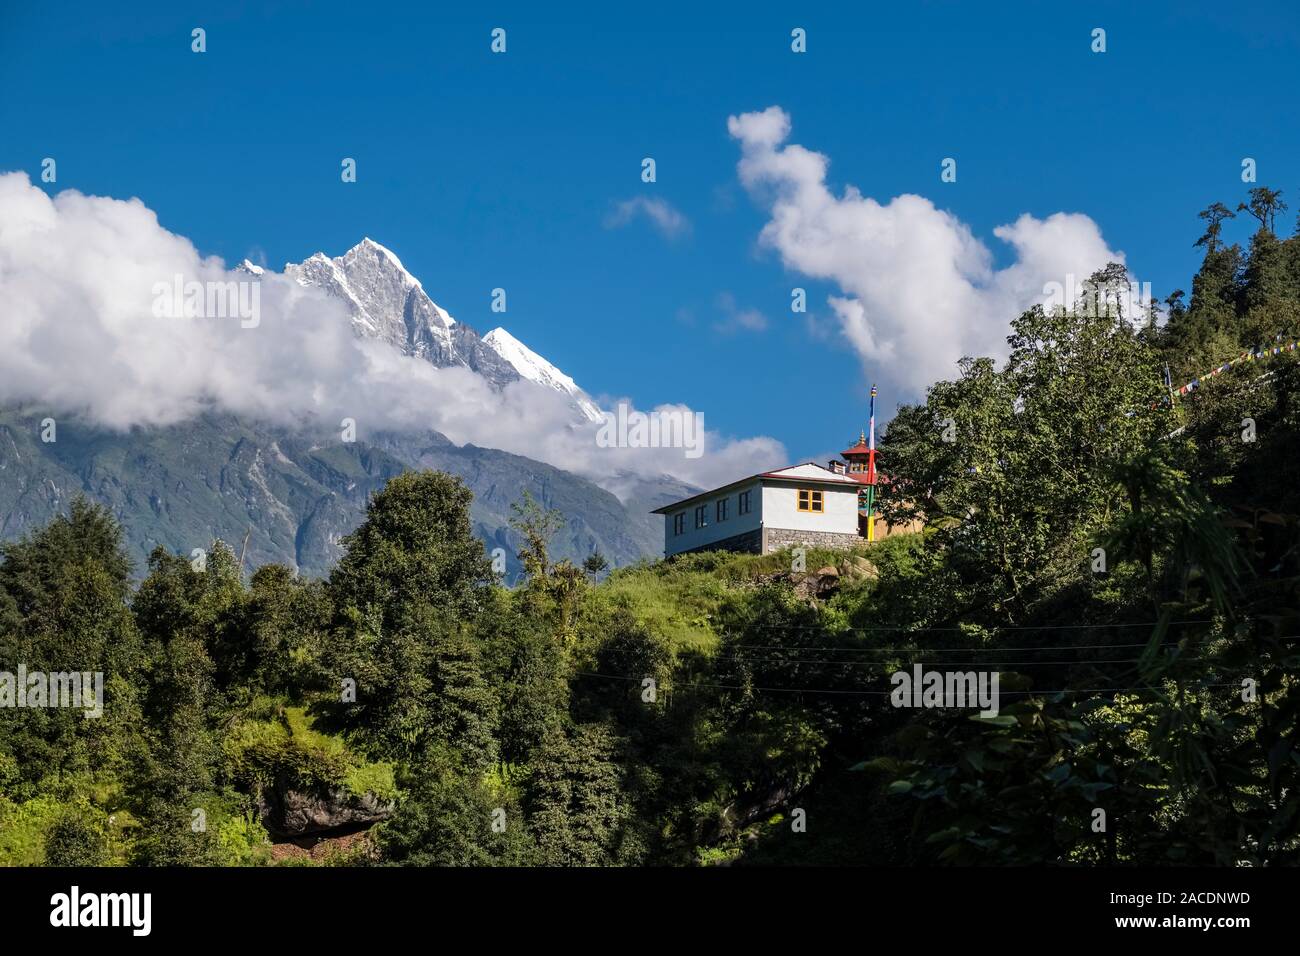 Farmers house in mountainous landscape near the pass Kari La, the summits of Numbur Himal in the distance Stock Photo